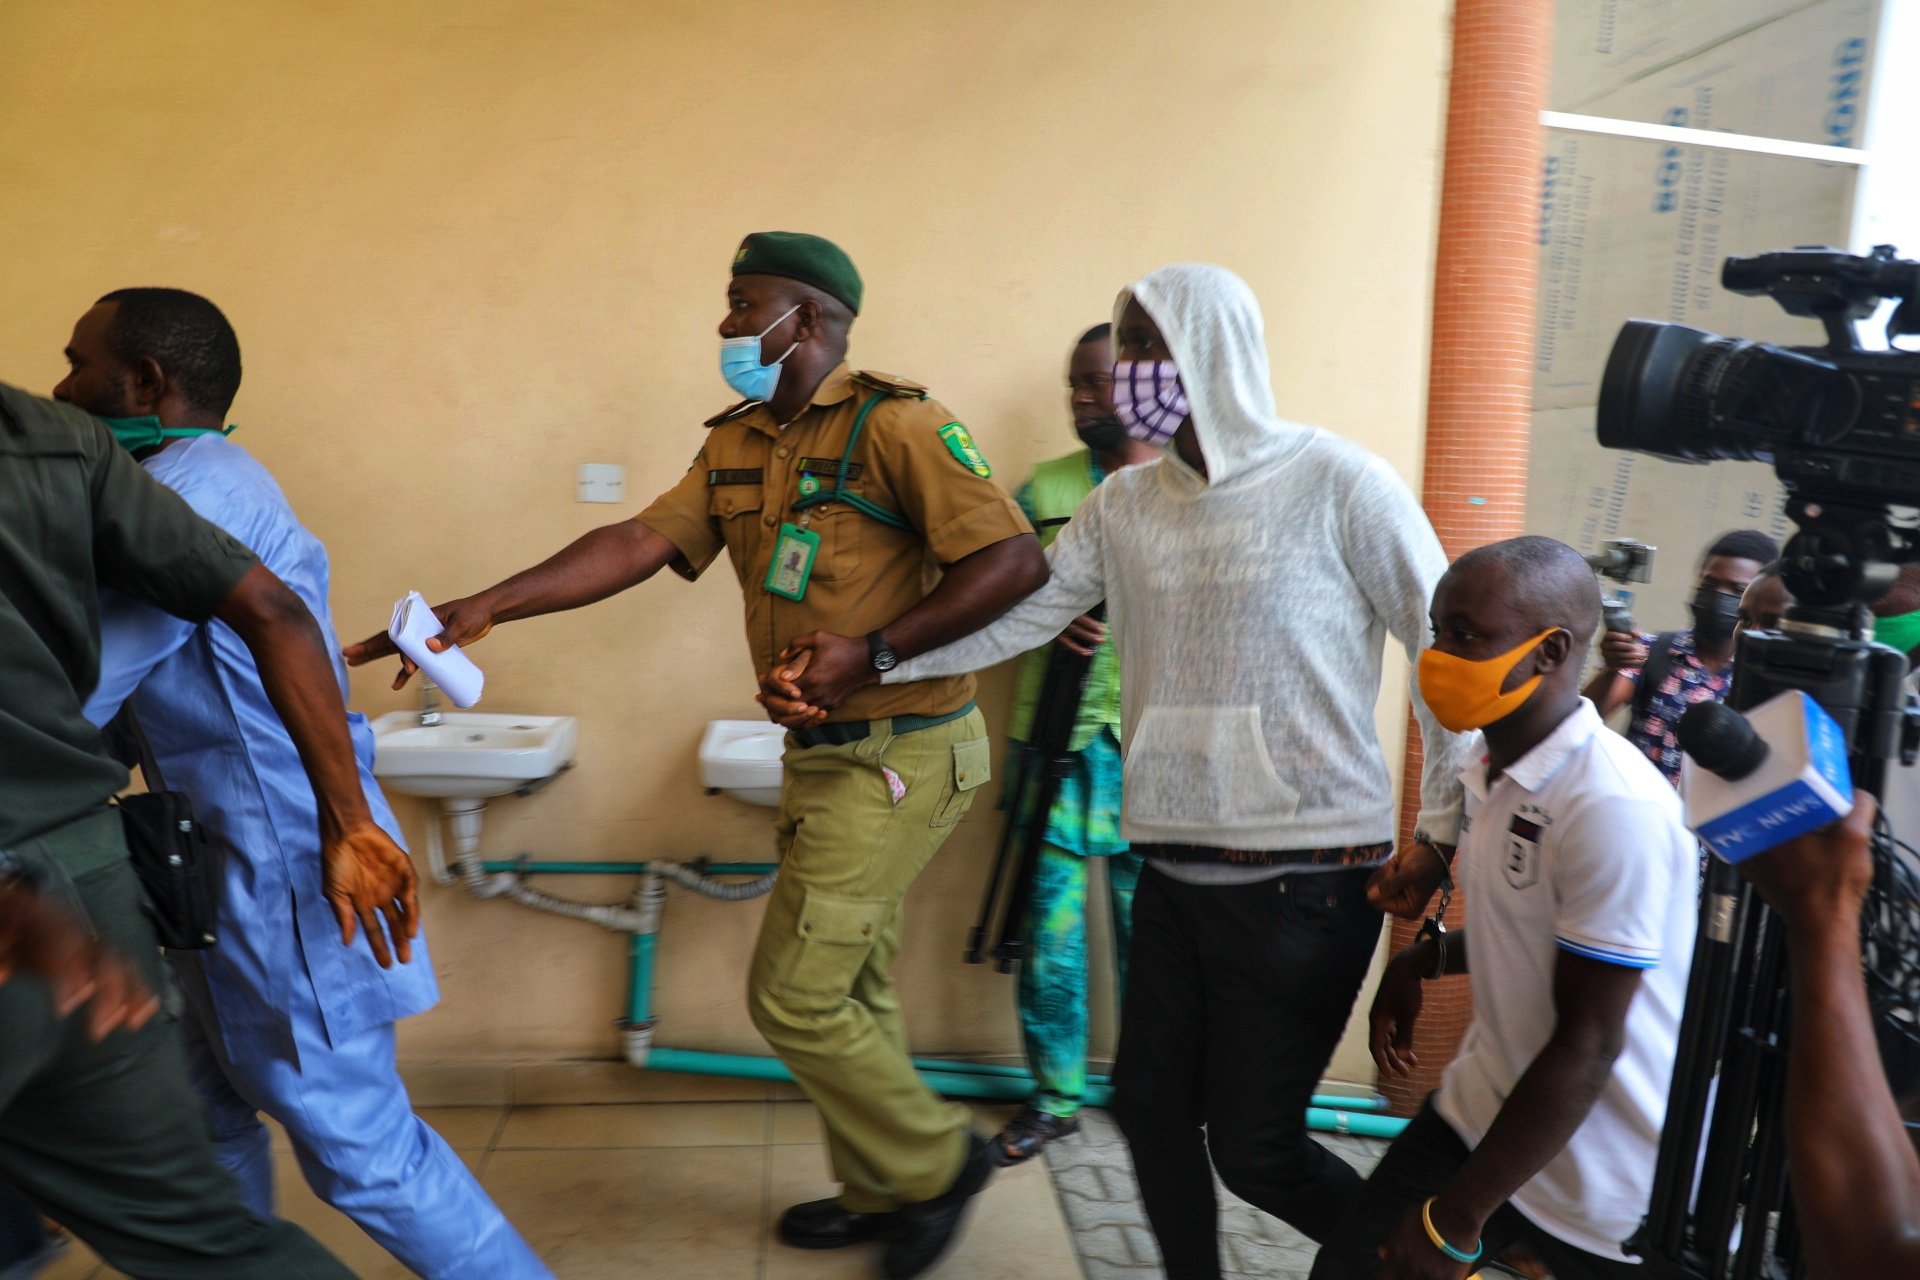 Baba Ijesha was dragged into the court by a prison warder to avoid pressmen and supporters